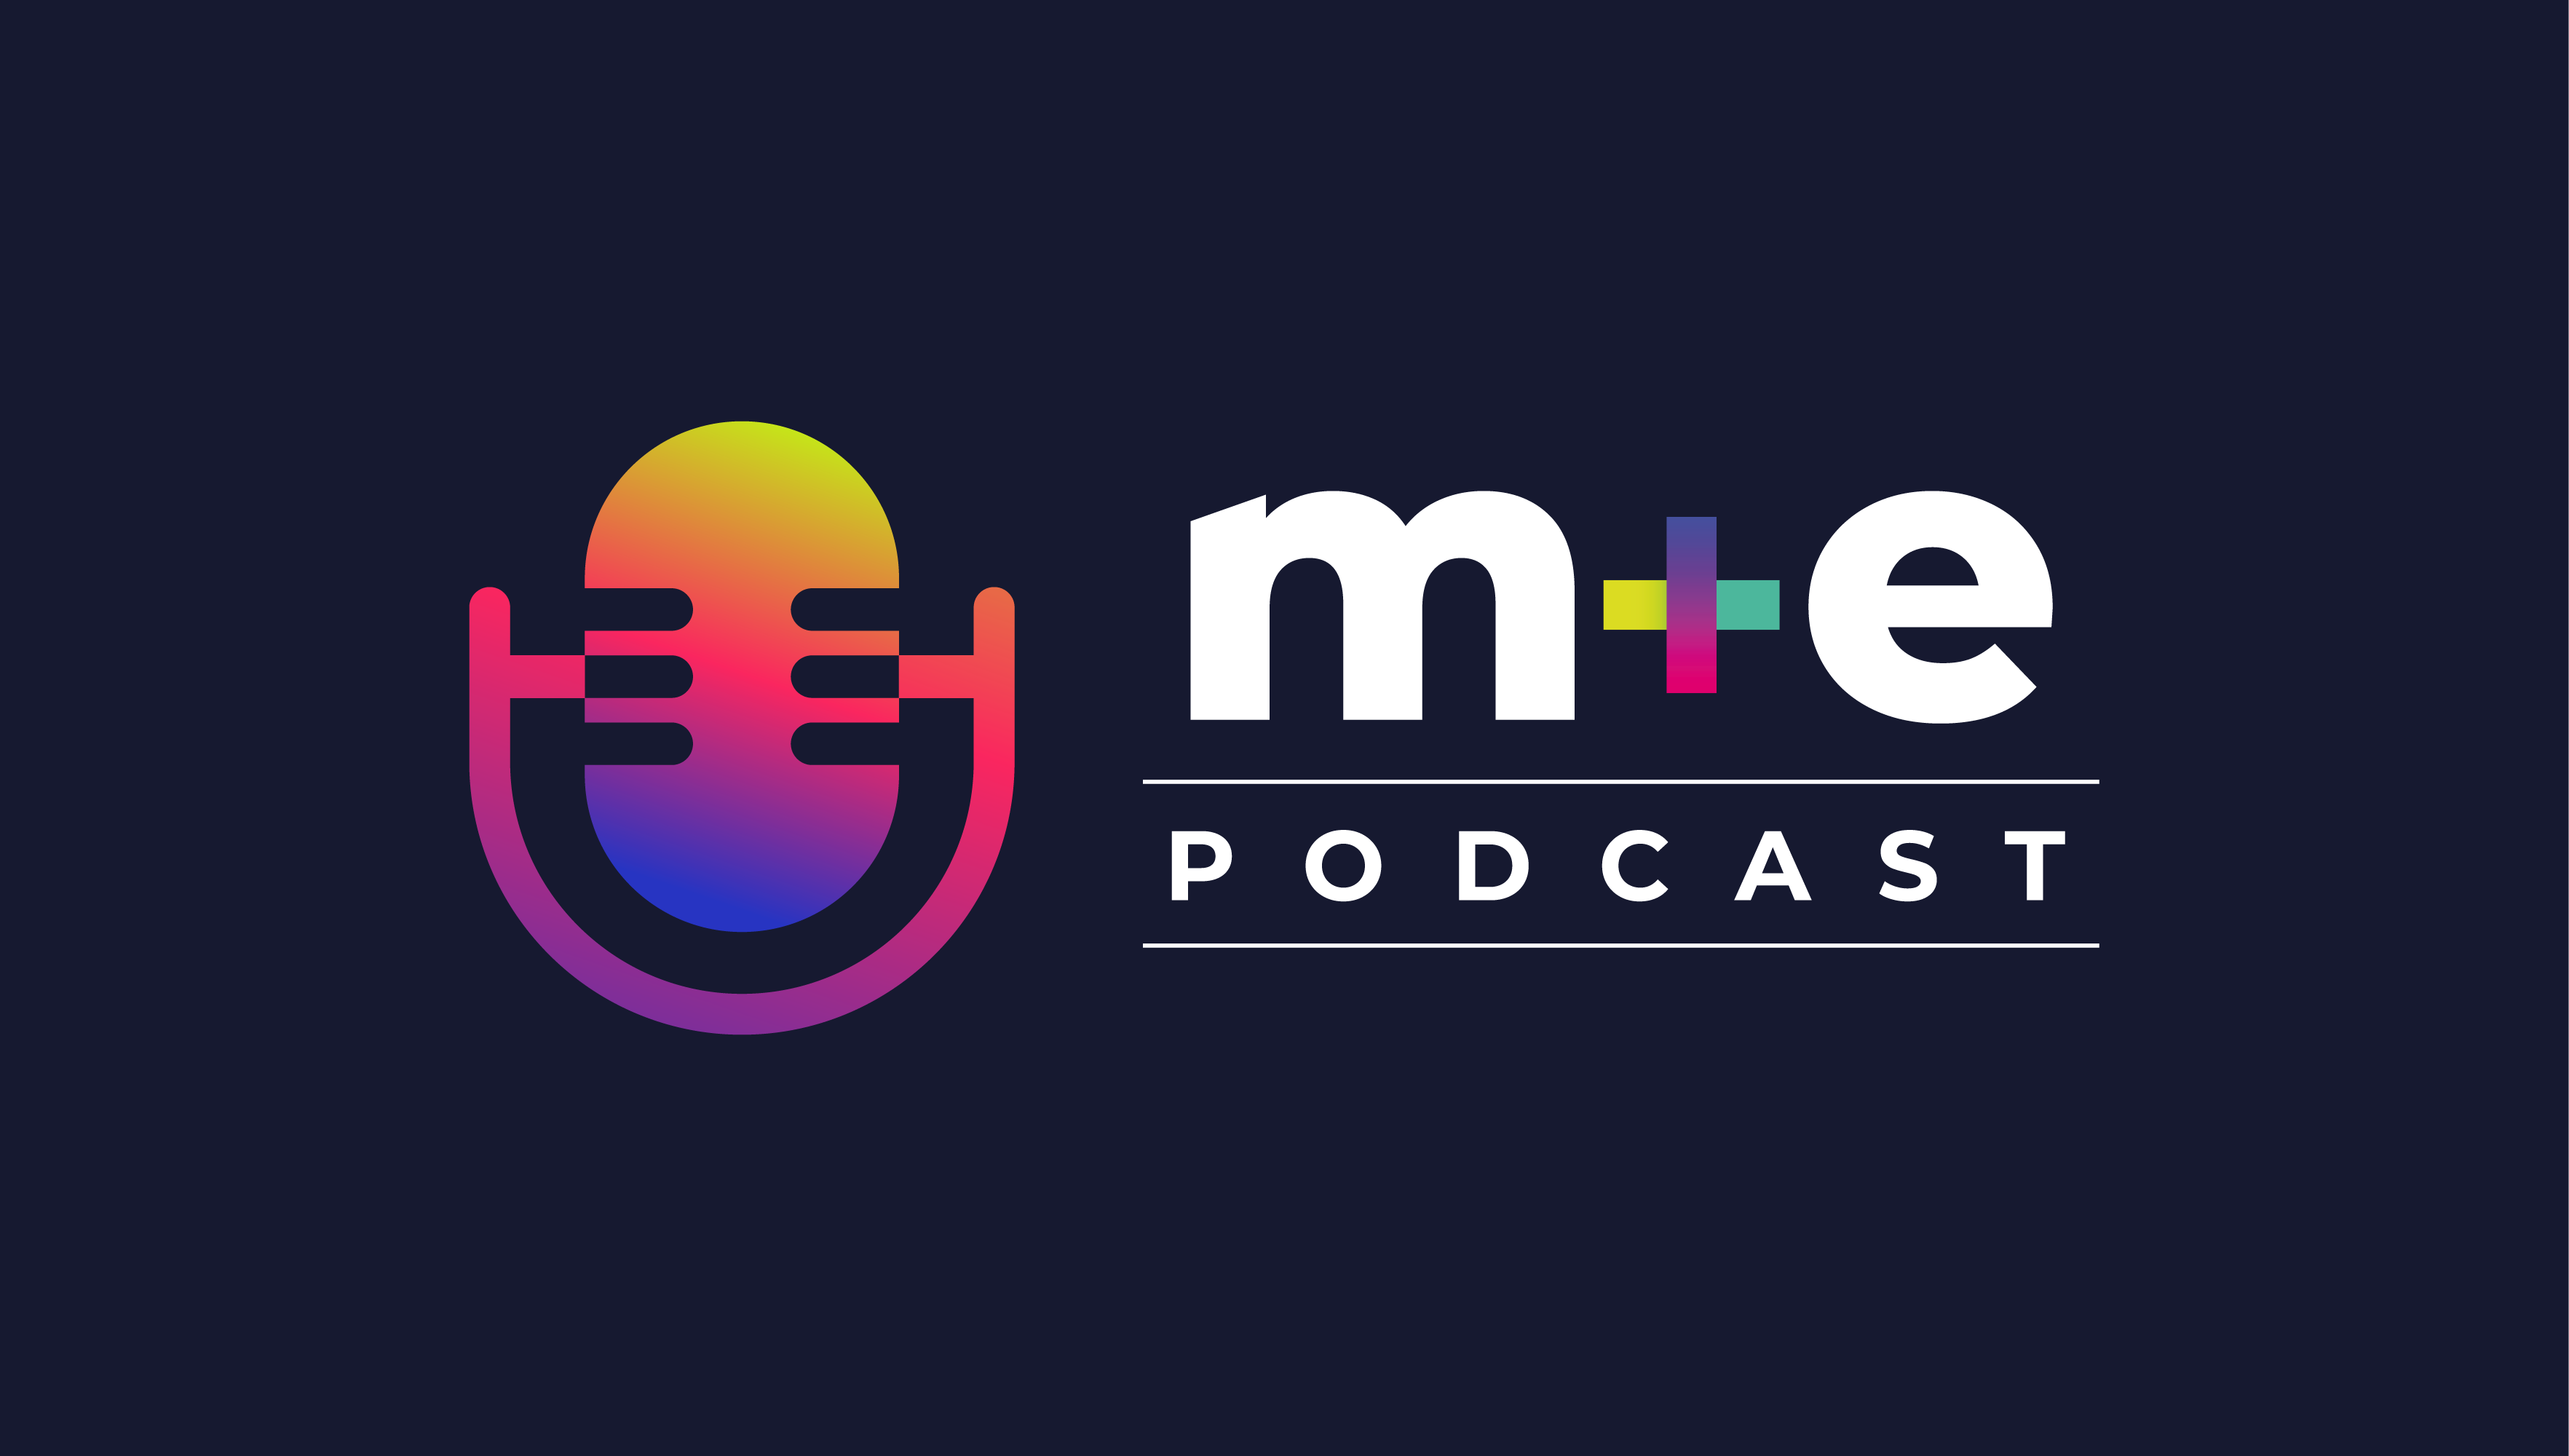 M&E Week Podcast with MAKE UK CEO - Episode 3 is live